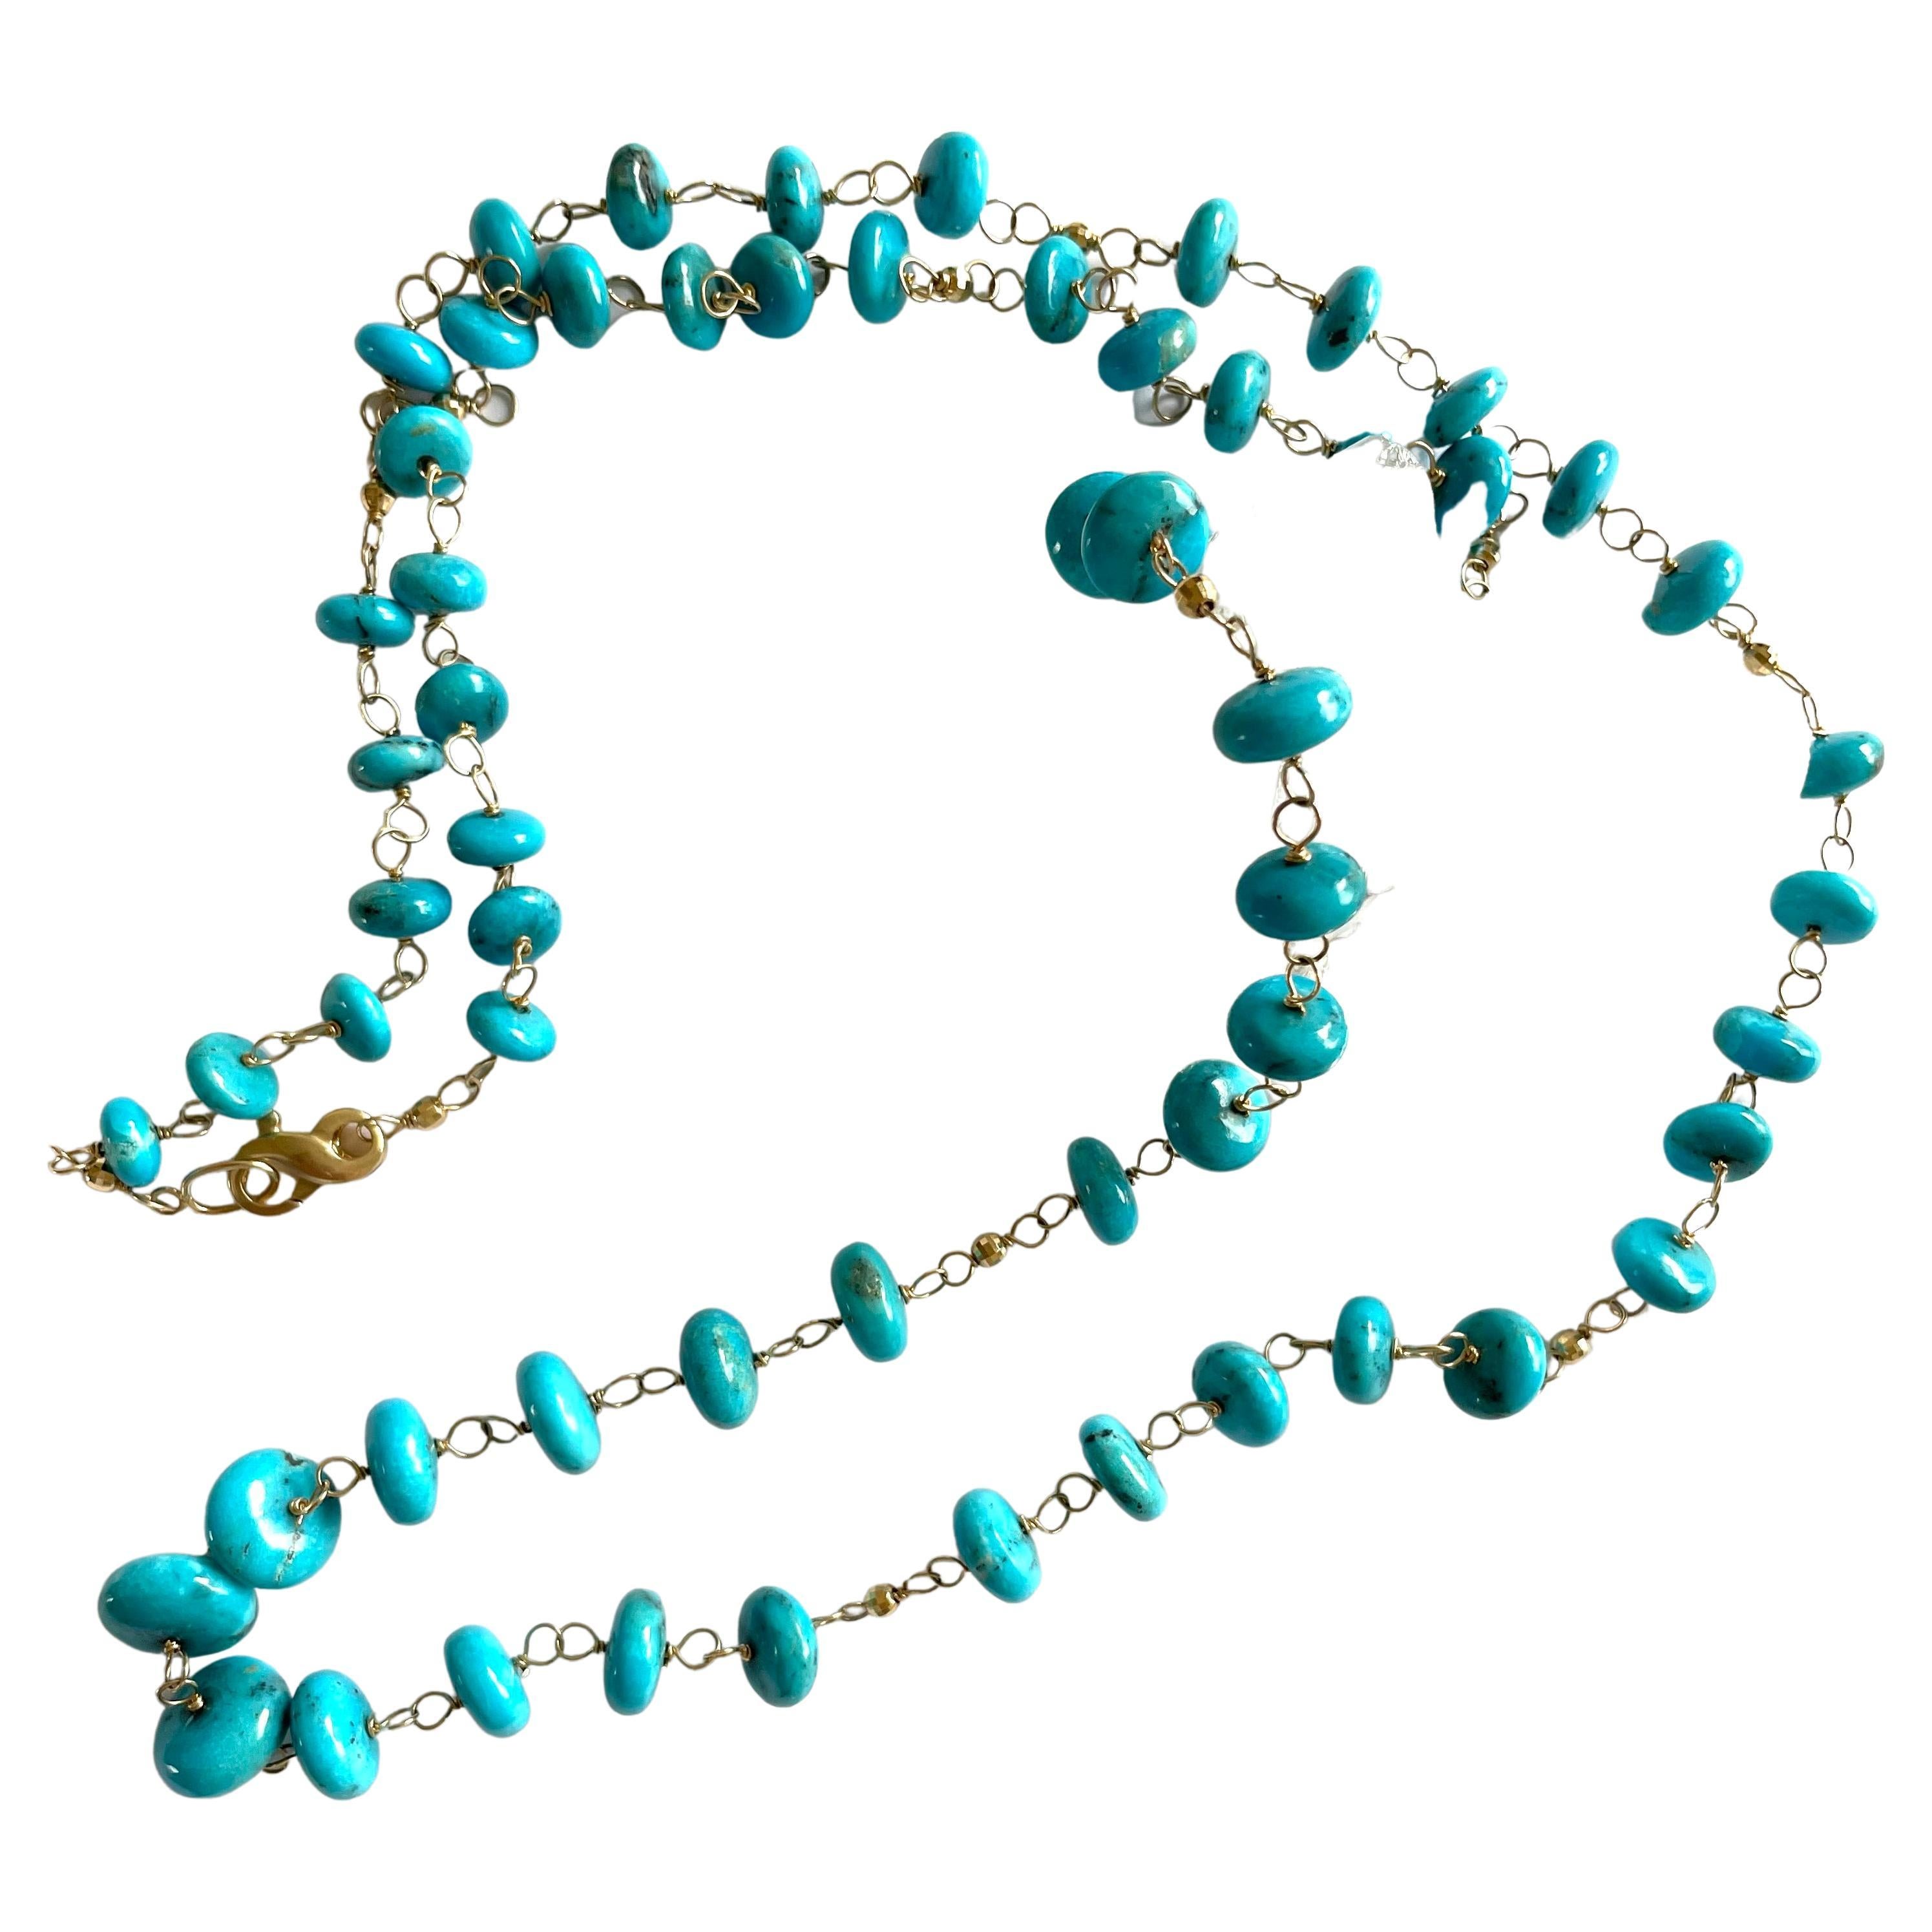 Description
Sleeping Beauty Turquoise accented with 14k faceted balls necklace. Can be doubled.
Item # N3791. For a luxurious layered look, pair this necklace with item: 